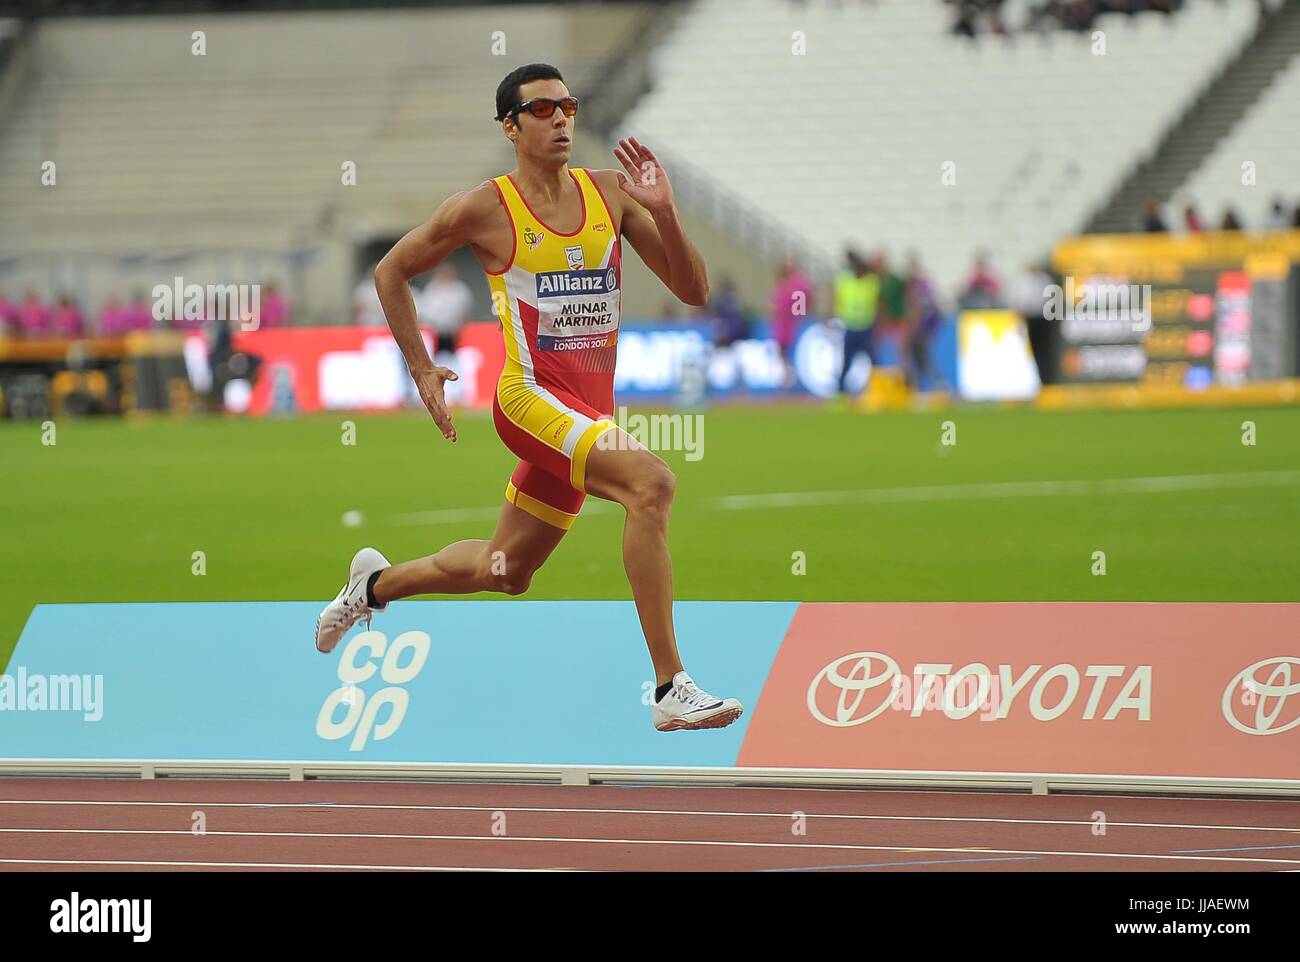 Stratford, UK. 19th July, 2017. Joan Munar Martinez (ESP) in his heat of the mens 200m T12. World para athletics championships. London Olympic stadium. Queen Elizabeth Olympic park. Stratford. London. UK. 19/07/2017. Credit: Sport In Pictures/Alamy Live News Stock Photo